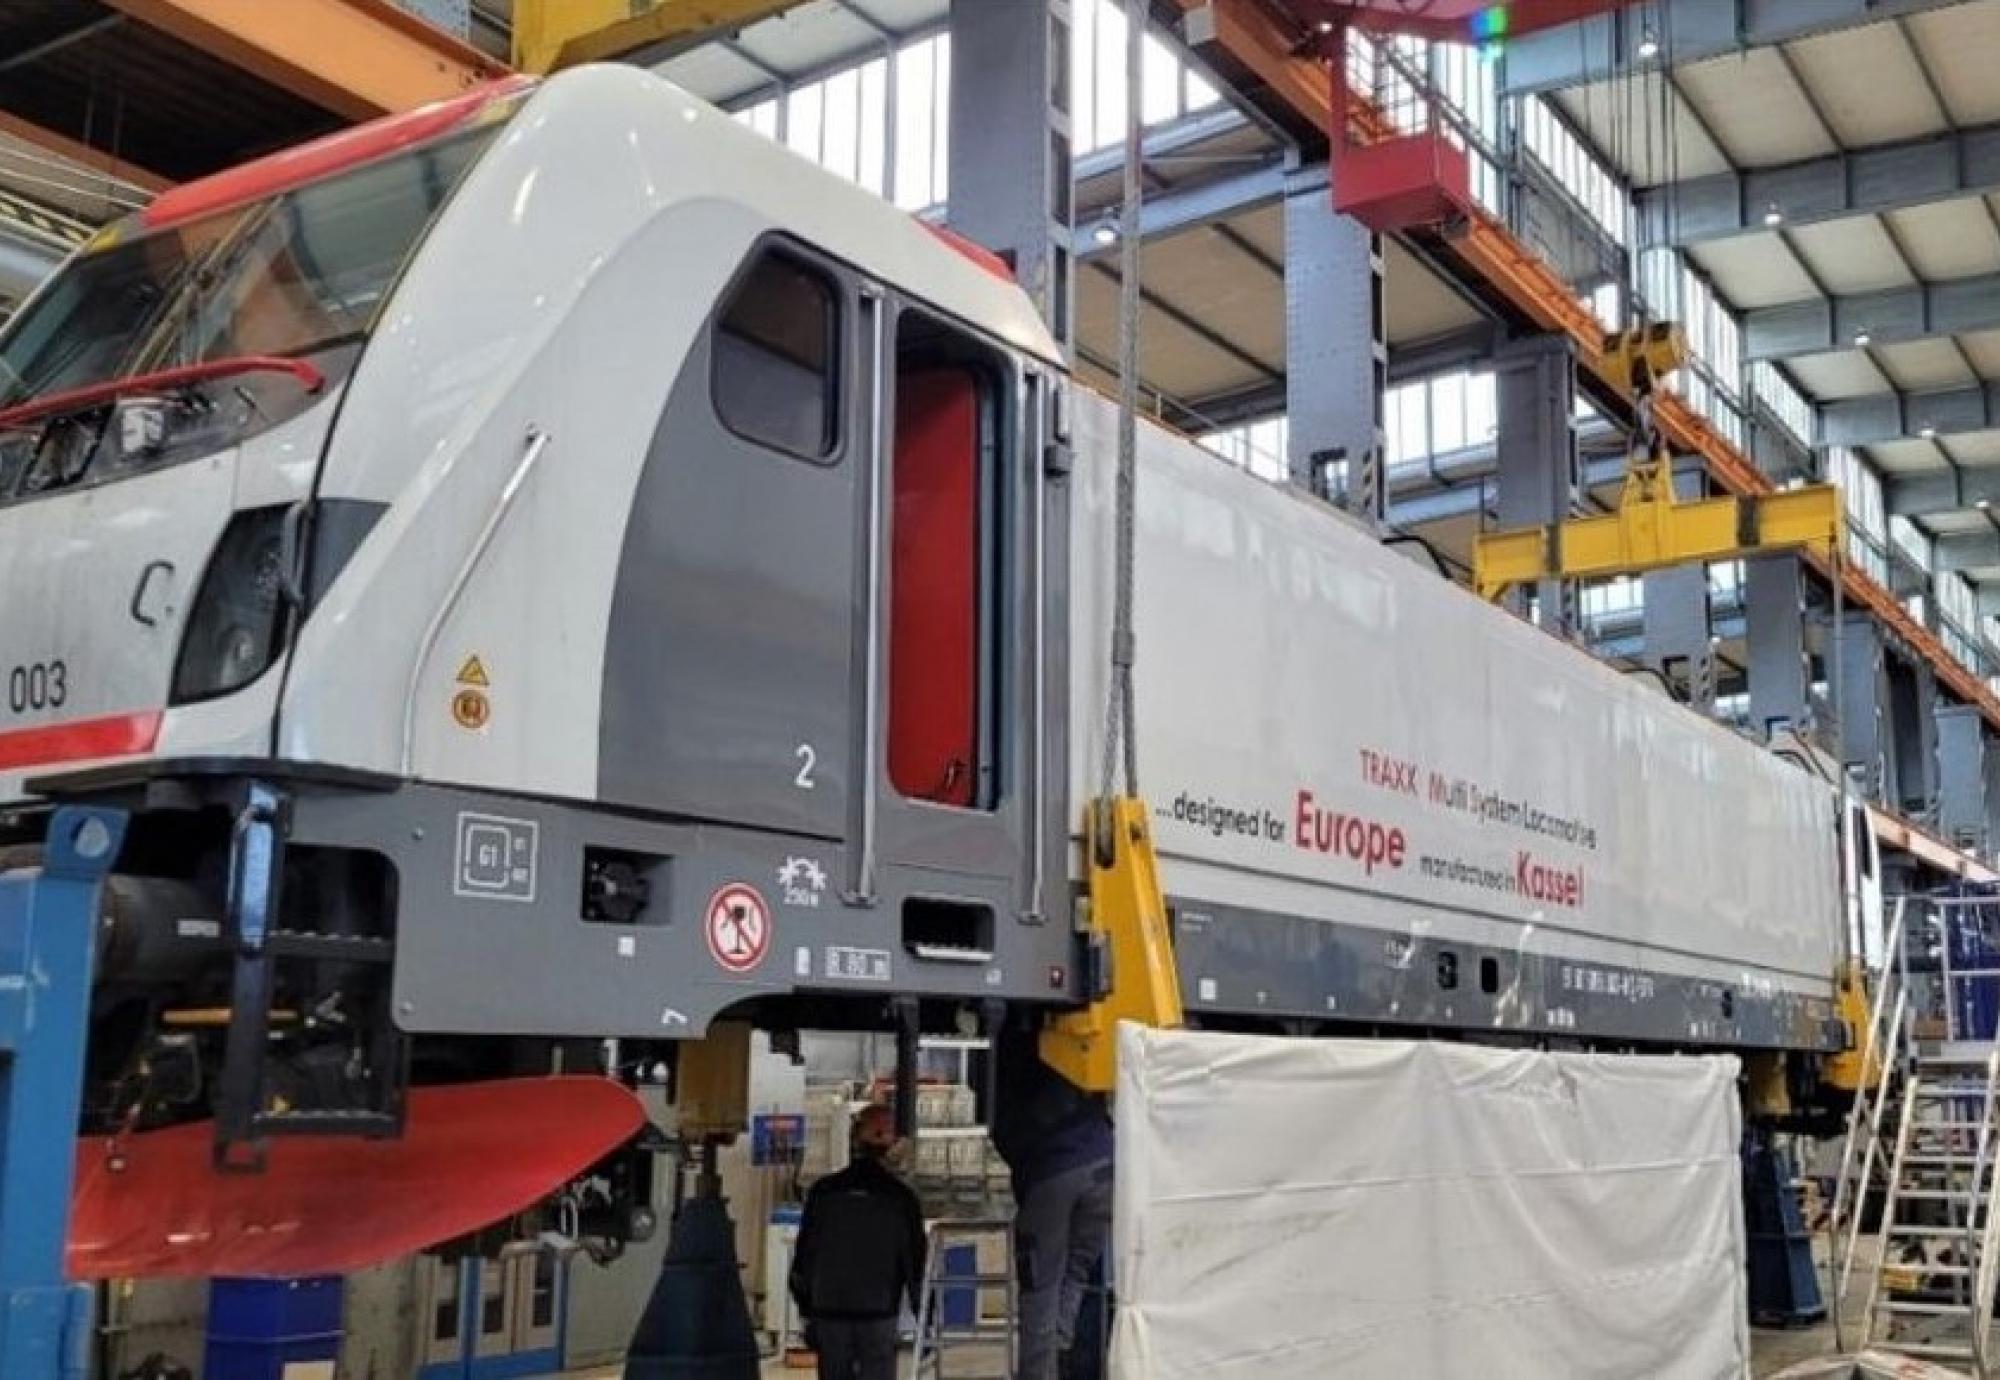 Traxx Locomotive installed with Atlas signalling systems enters testing